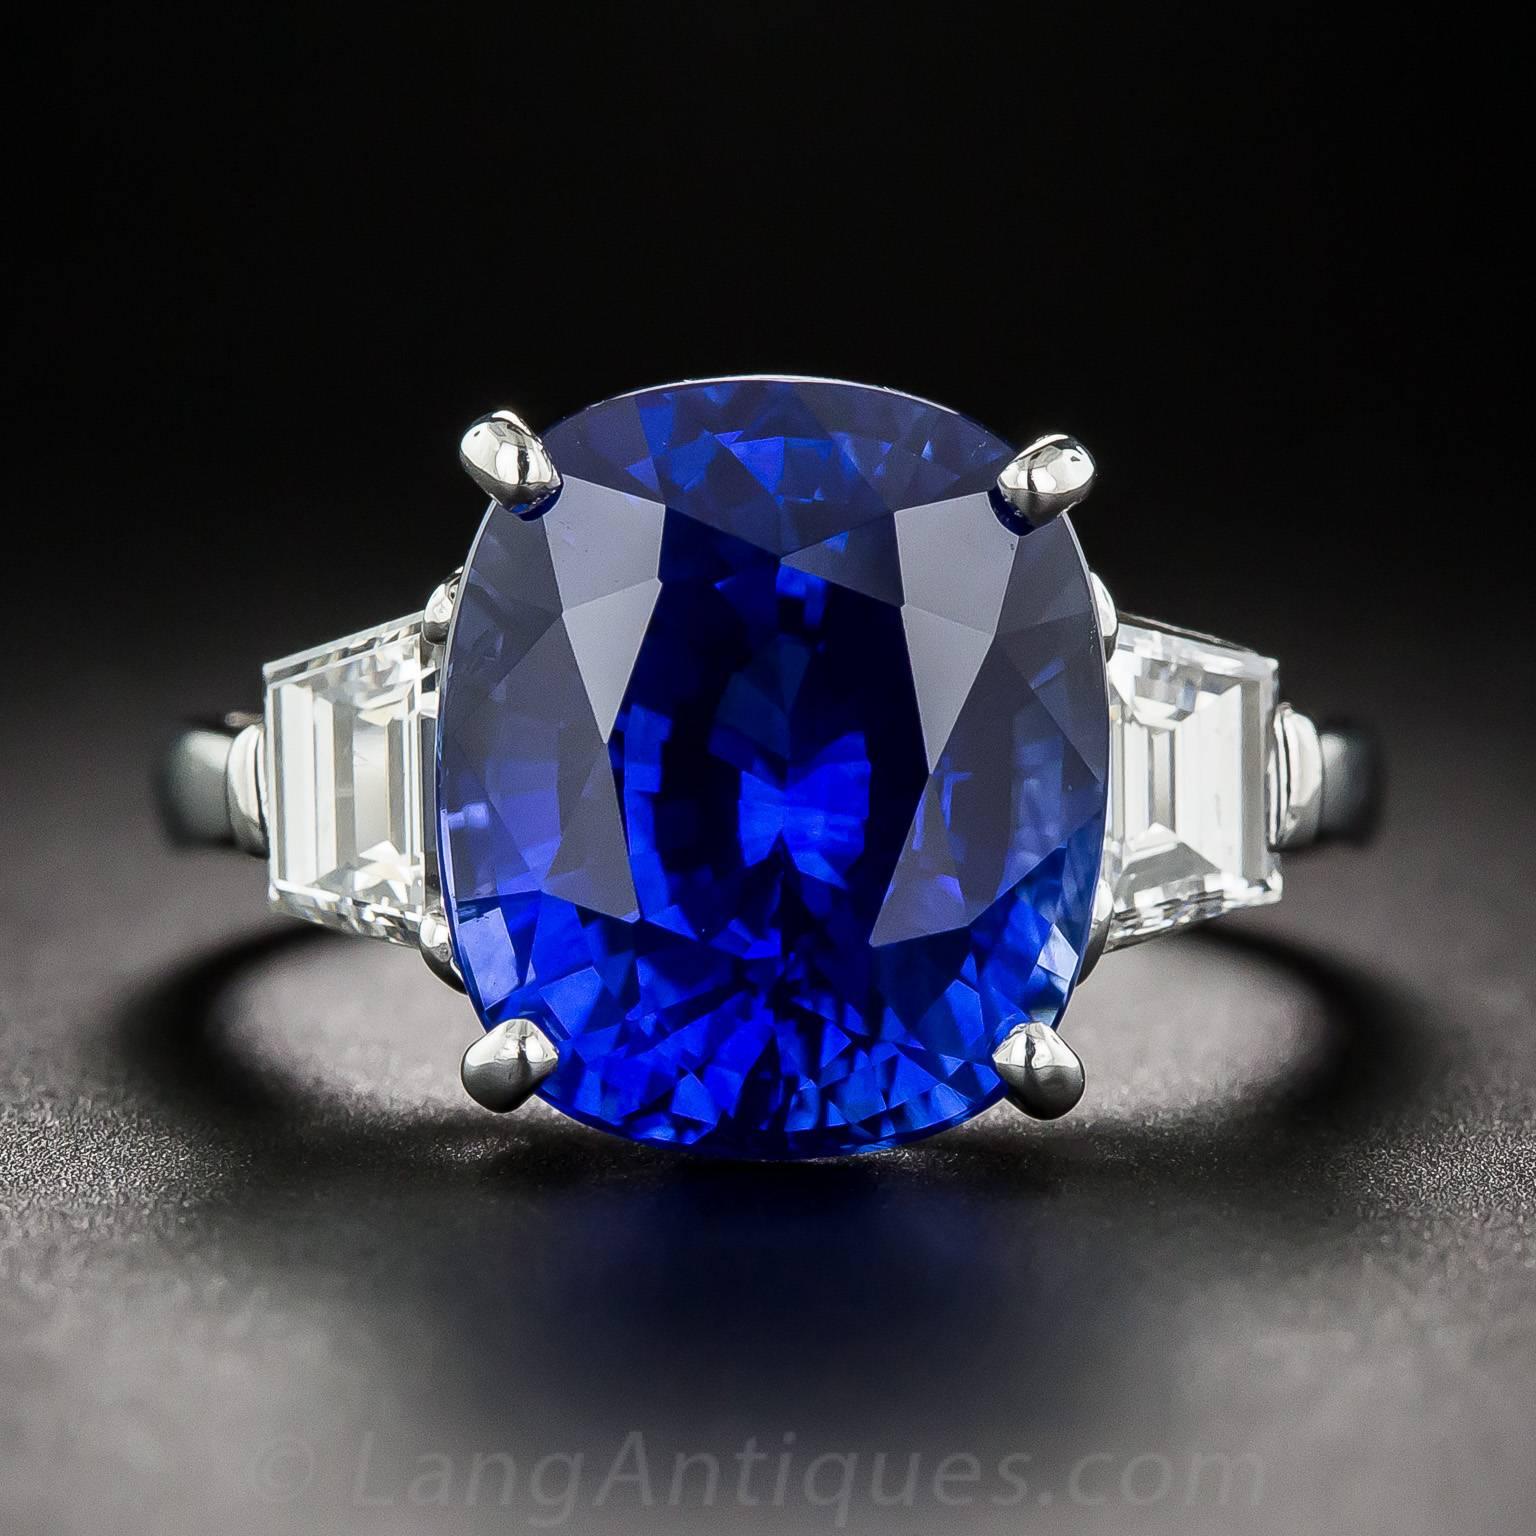 Few, if any, sapphires come bluer or as beautiful as this absolutely gorgeous, cushion-cut Ceylon sapphire, weighing 9.48 carats. The majestic gemstone radiates with a rich, deeply saturated royal blue hue that more resembles a classic Burmese color